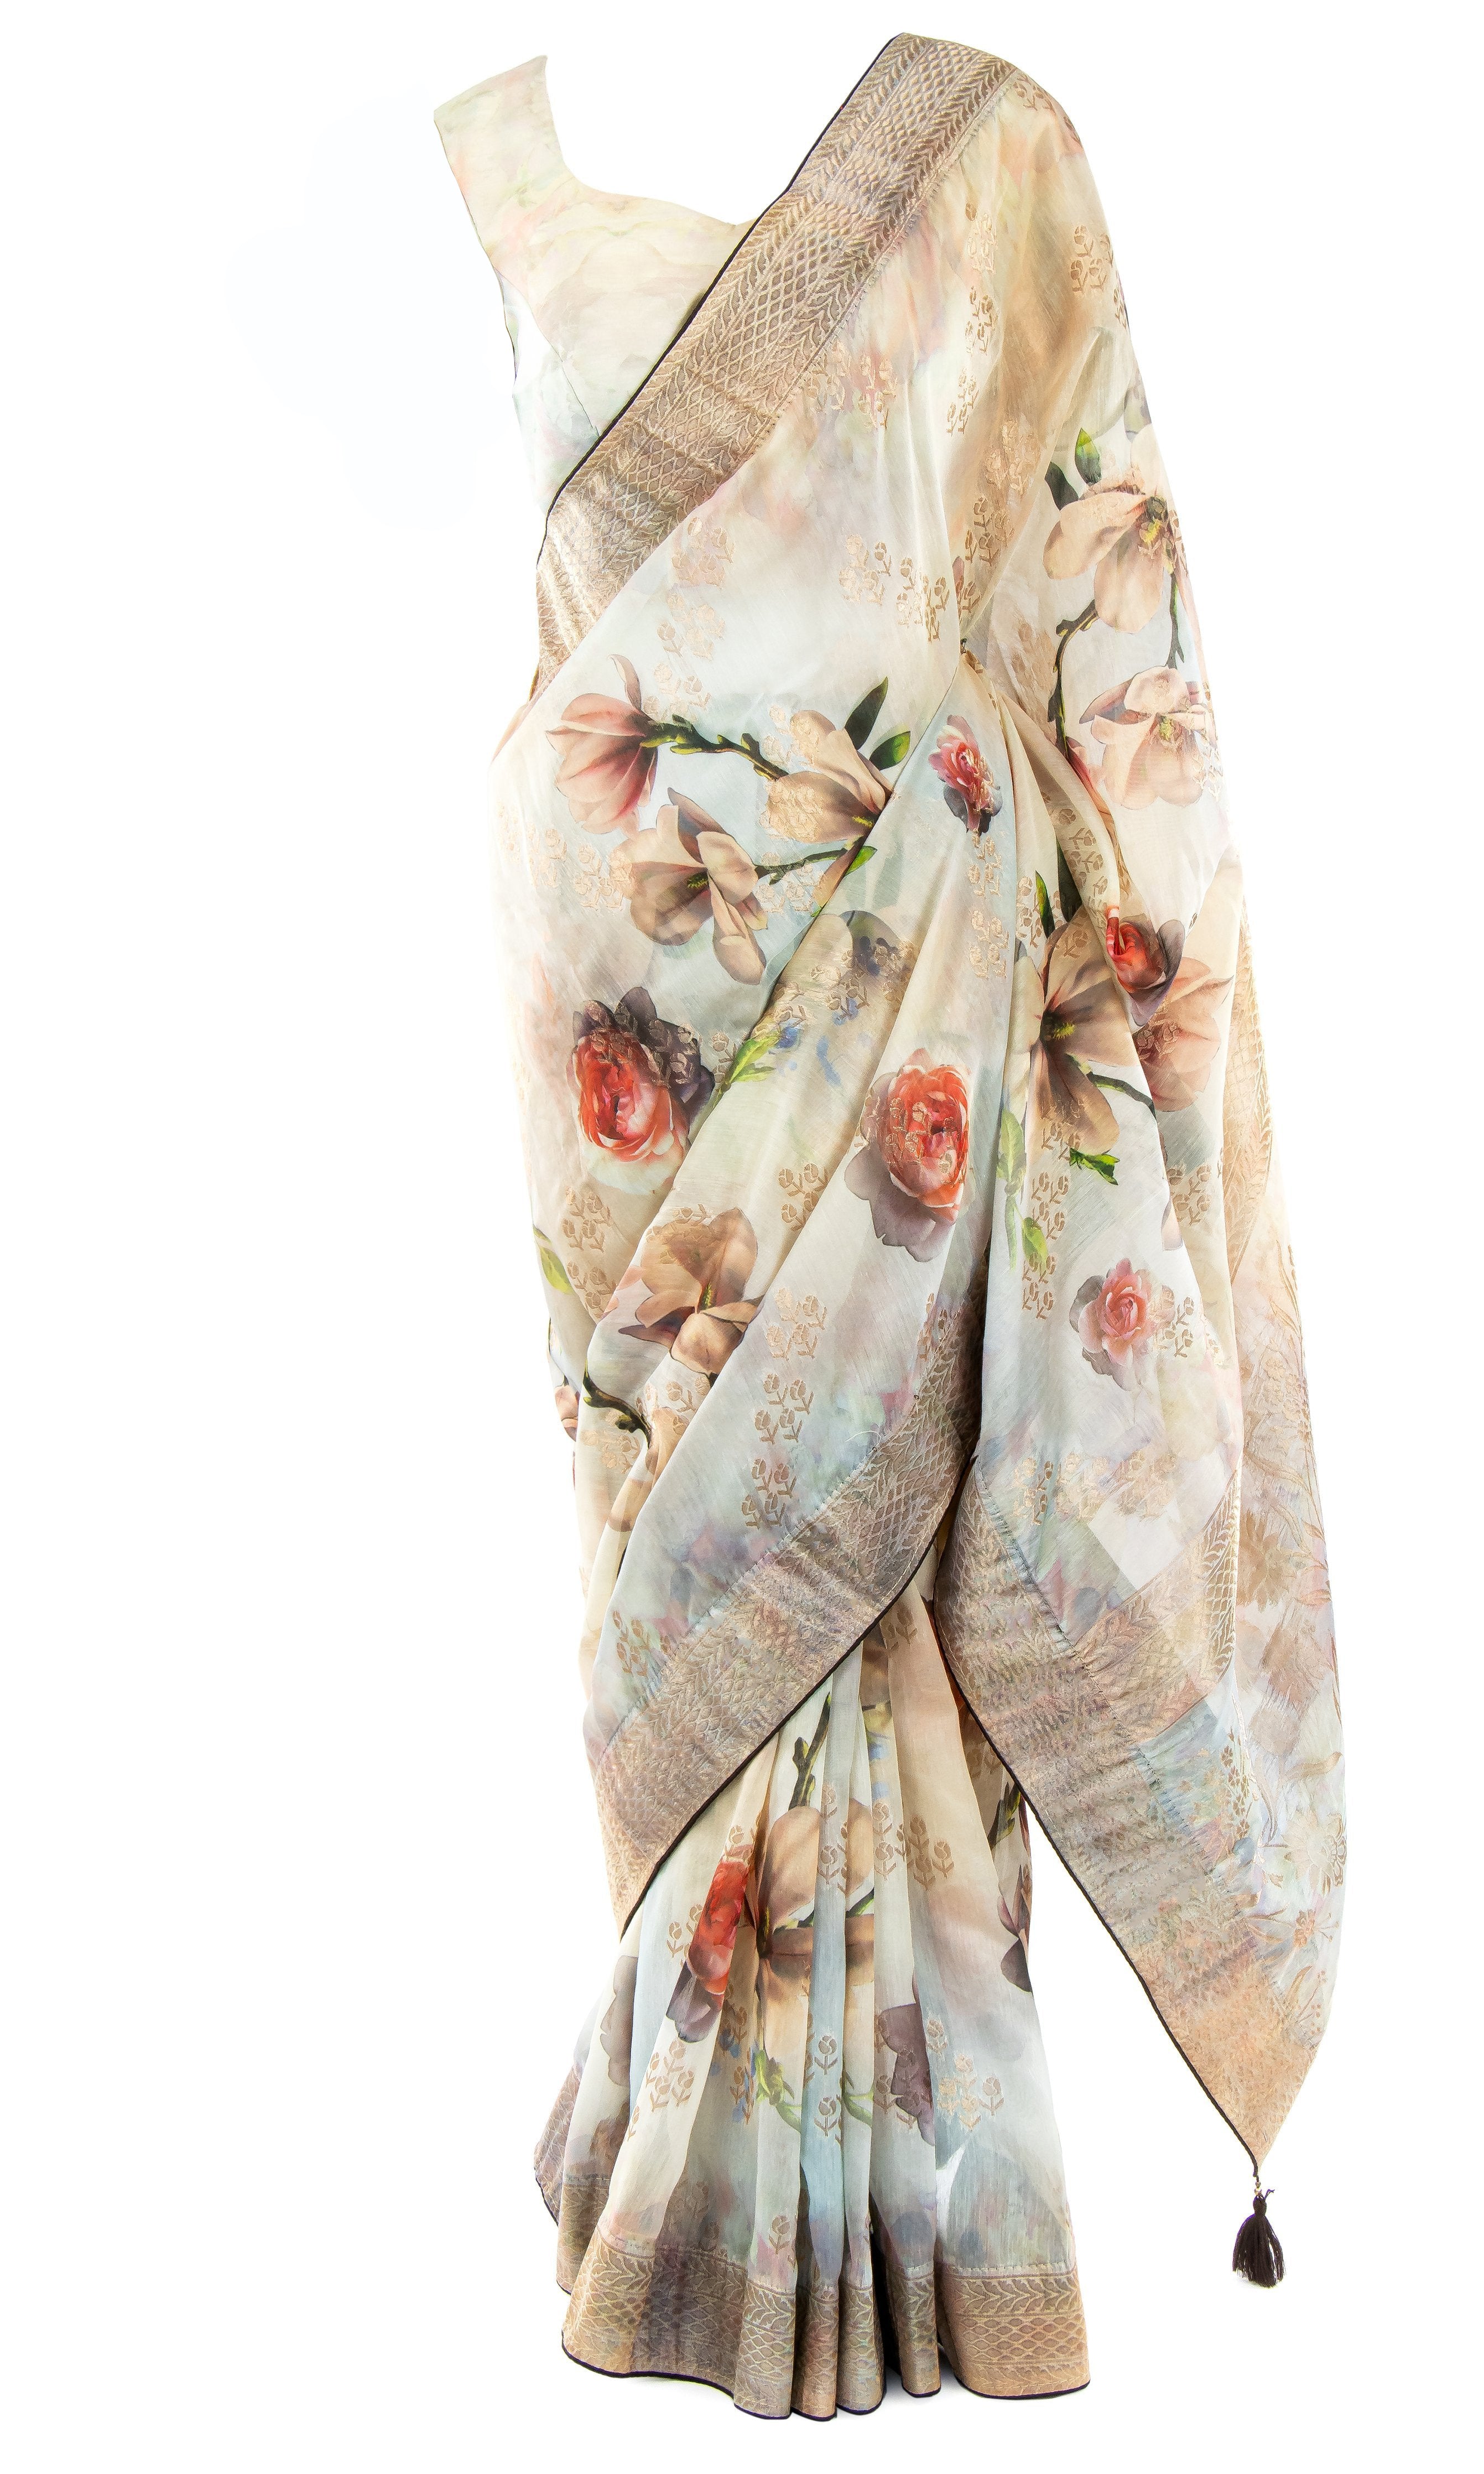 Ready-made linen Saree with a multicolor floral pattern & has a adjustable Blouse